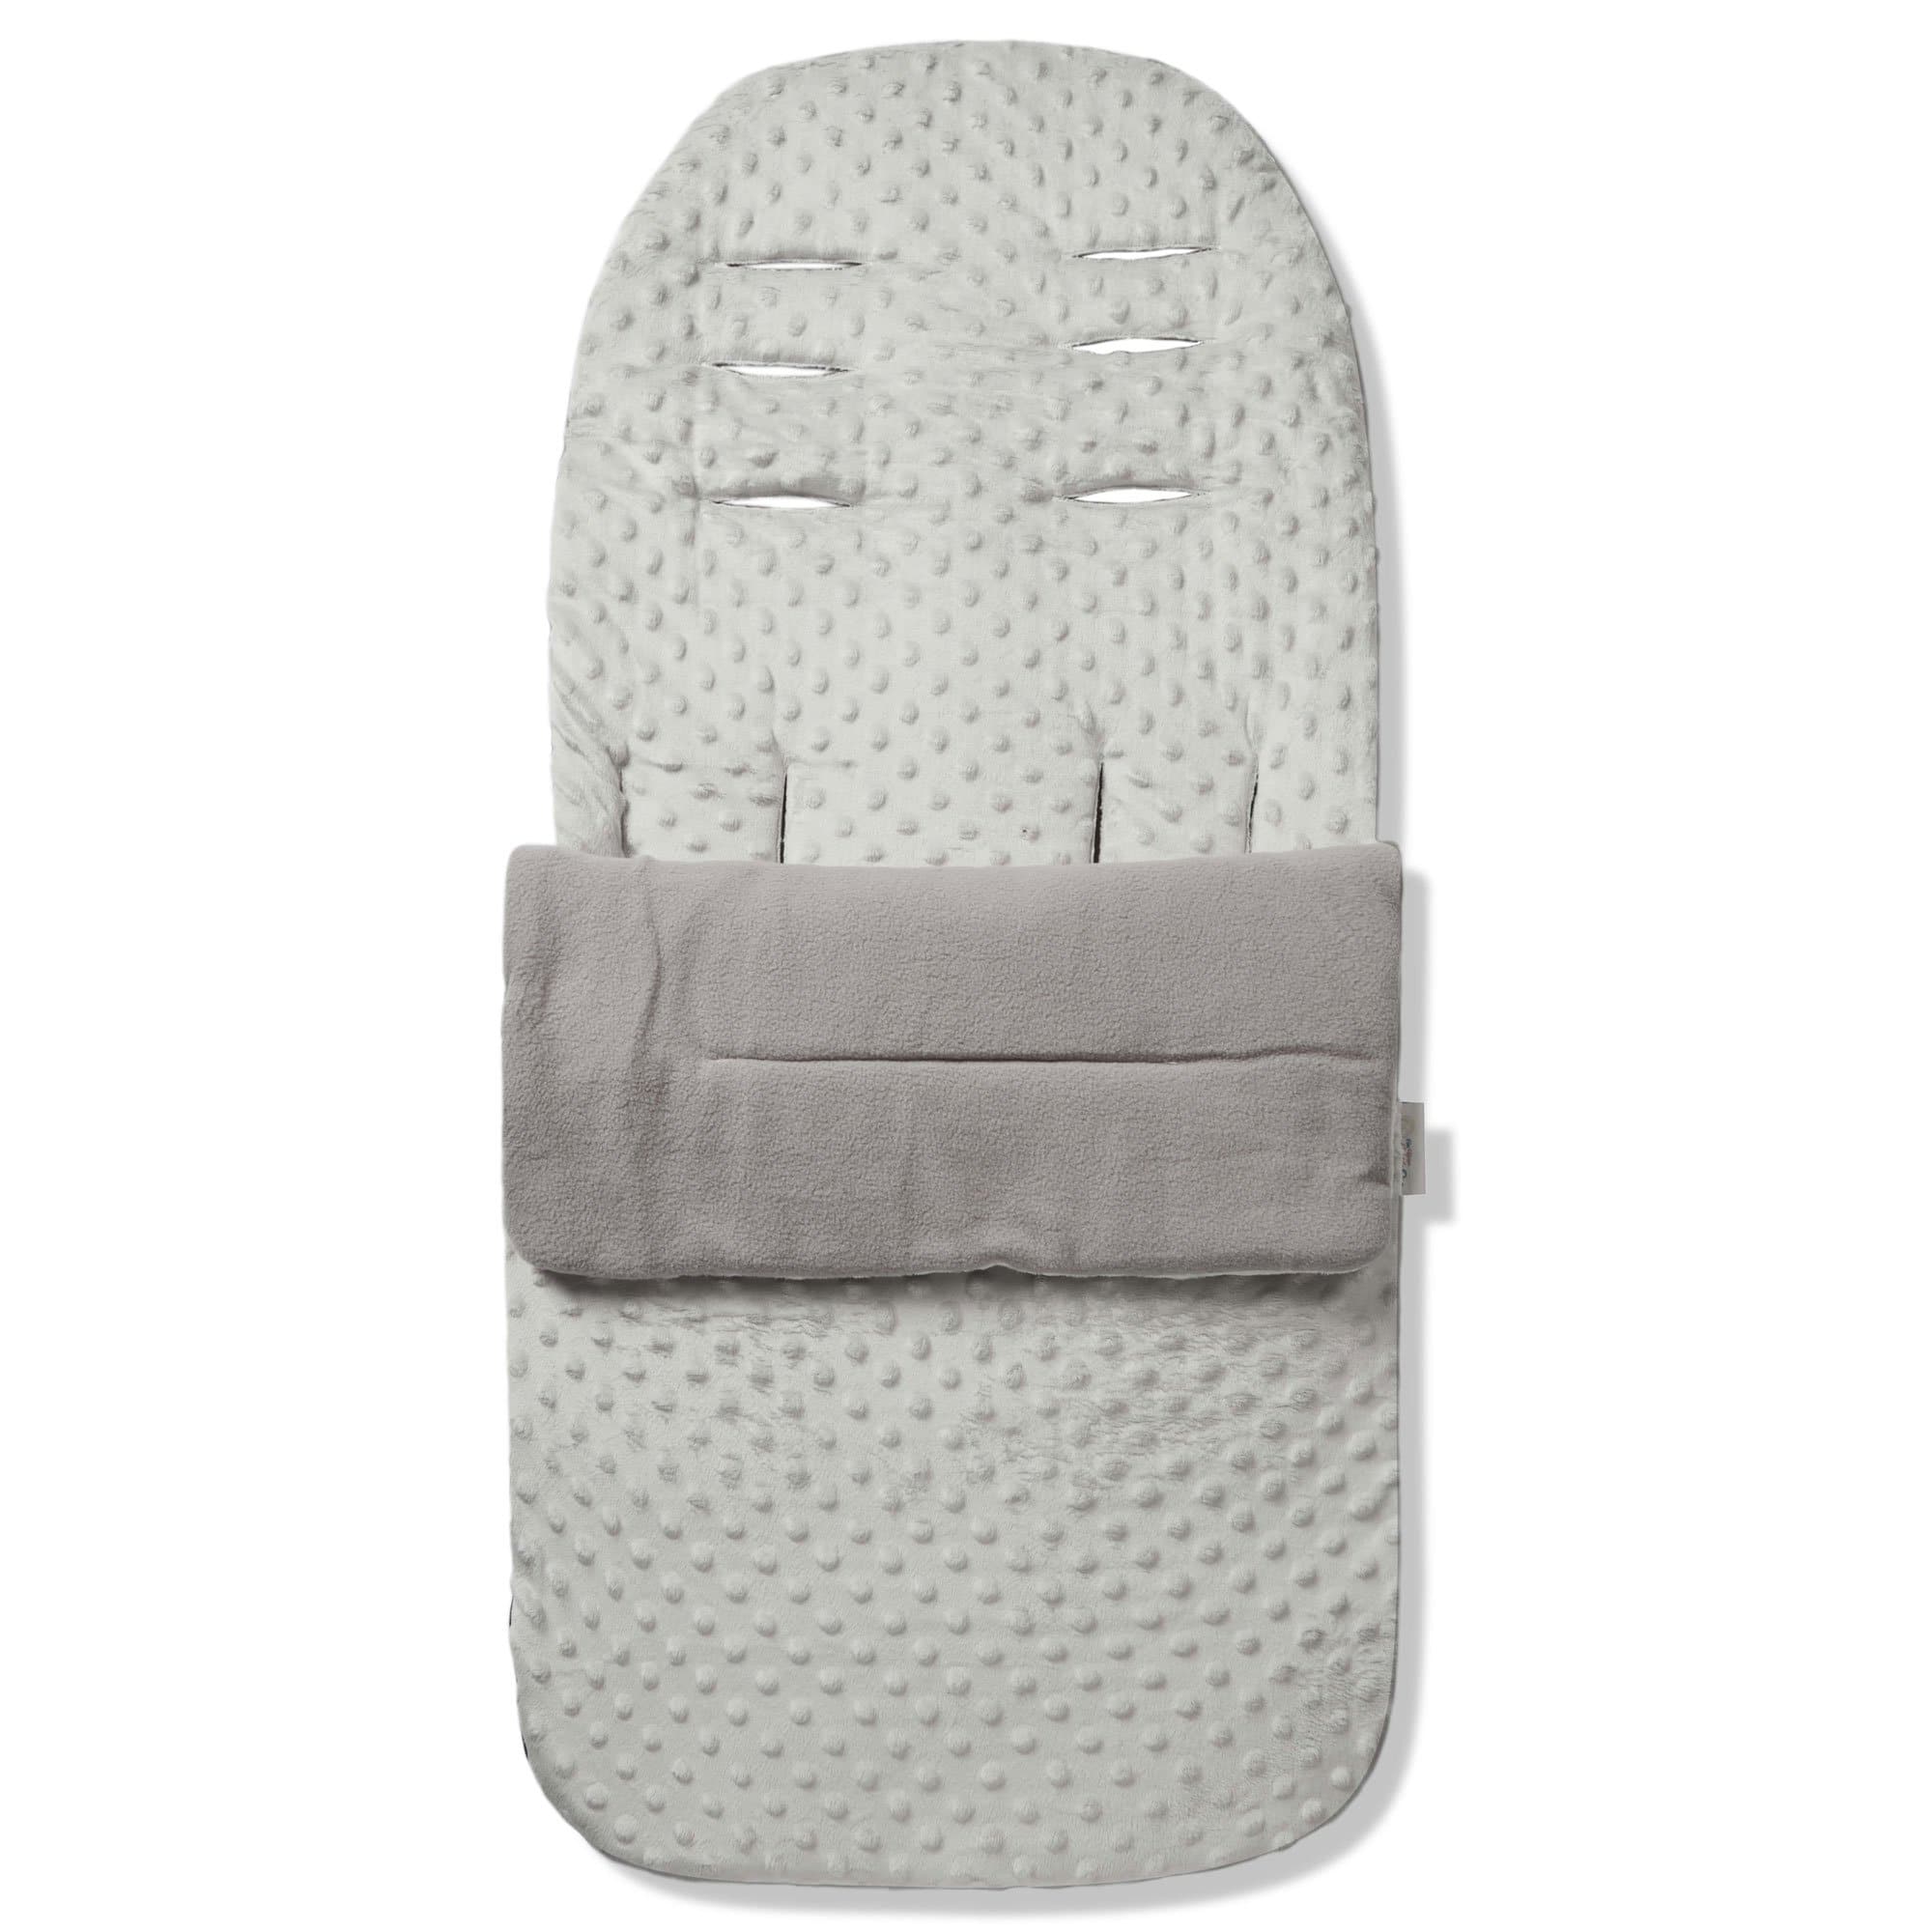 Dimple Footmuff / Cosy Toes Compatible with Cosatto - Grey / Fits All Models | For Your Little One